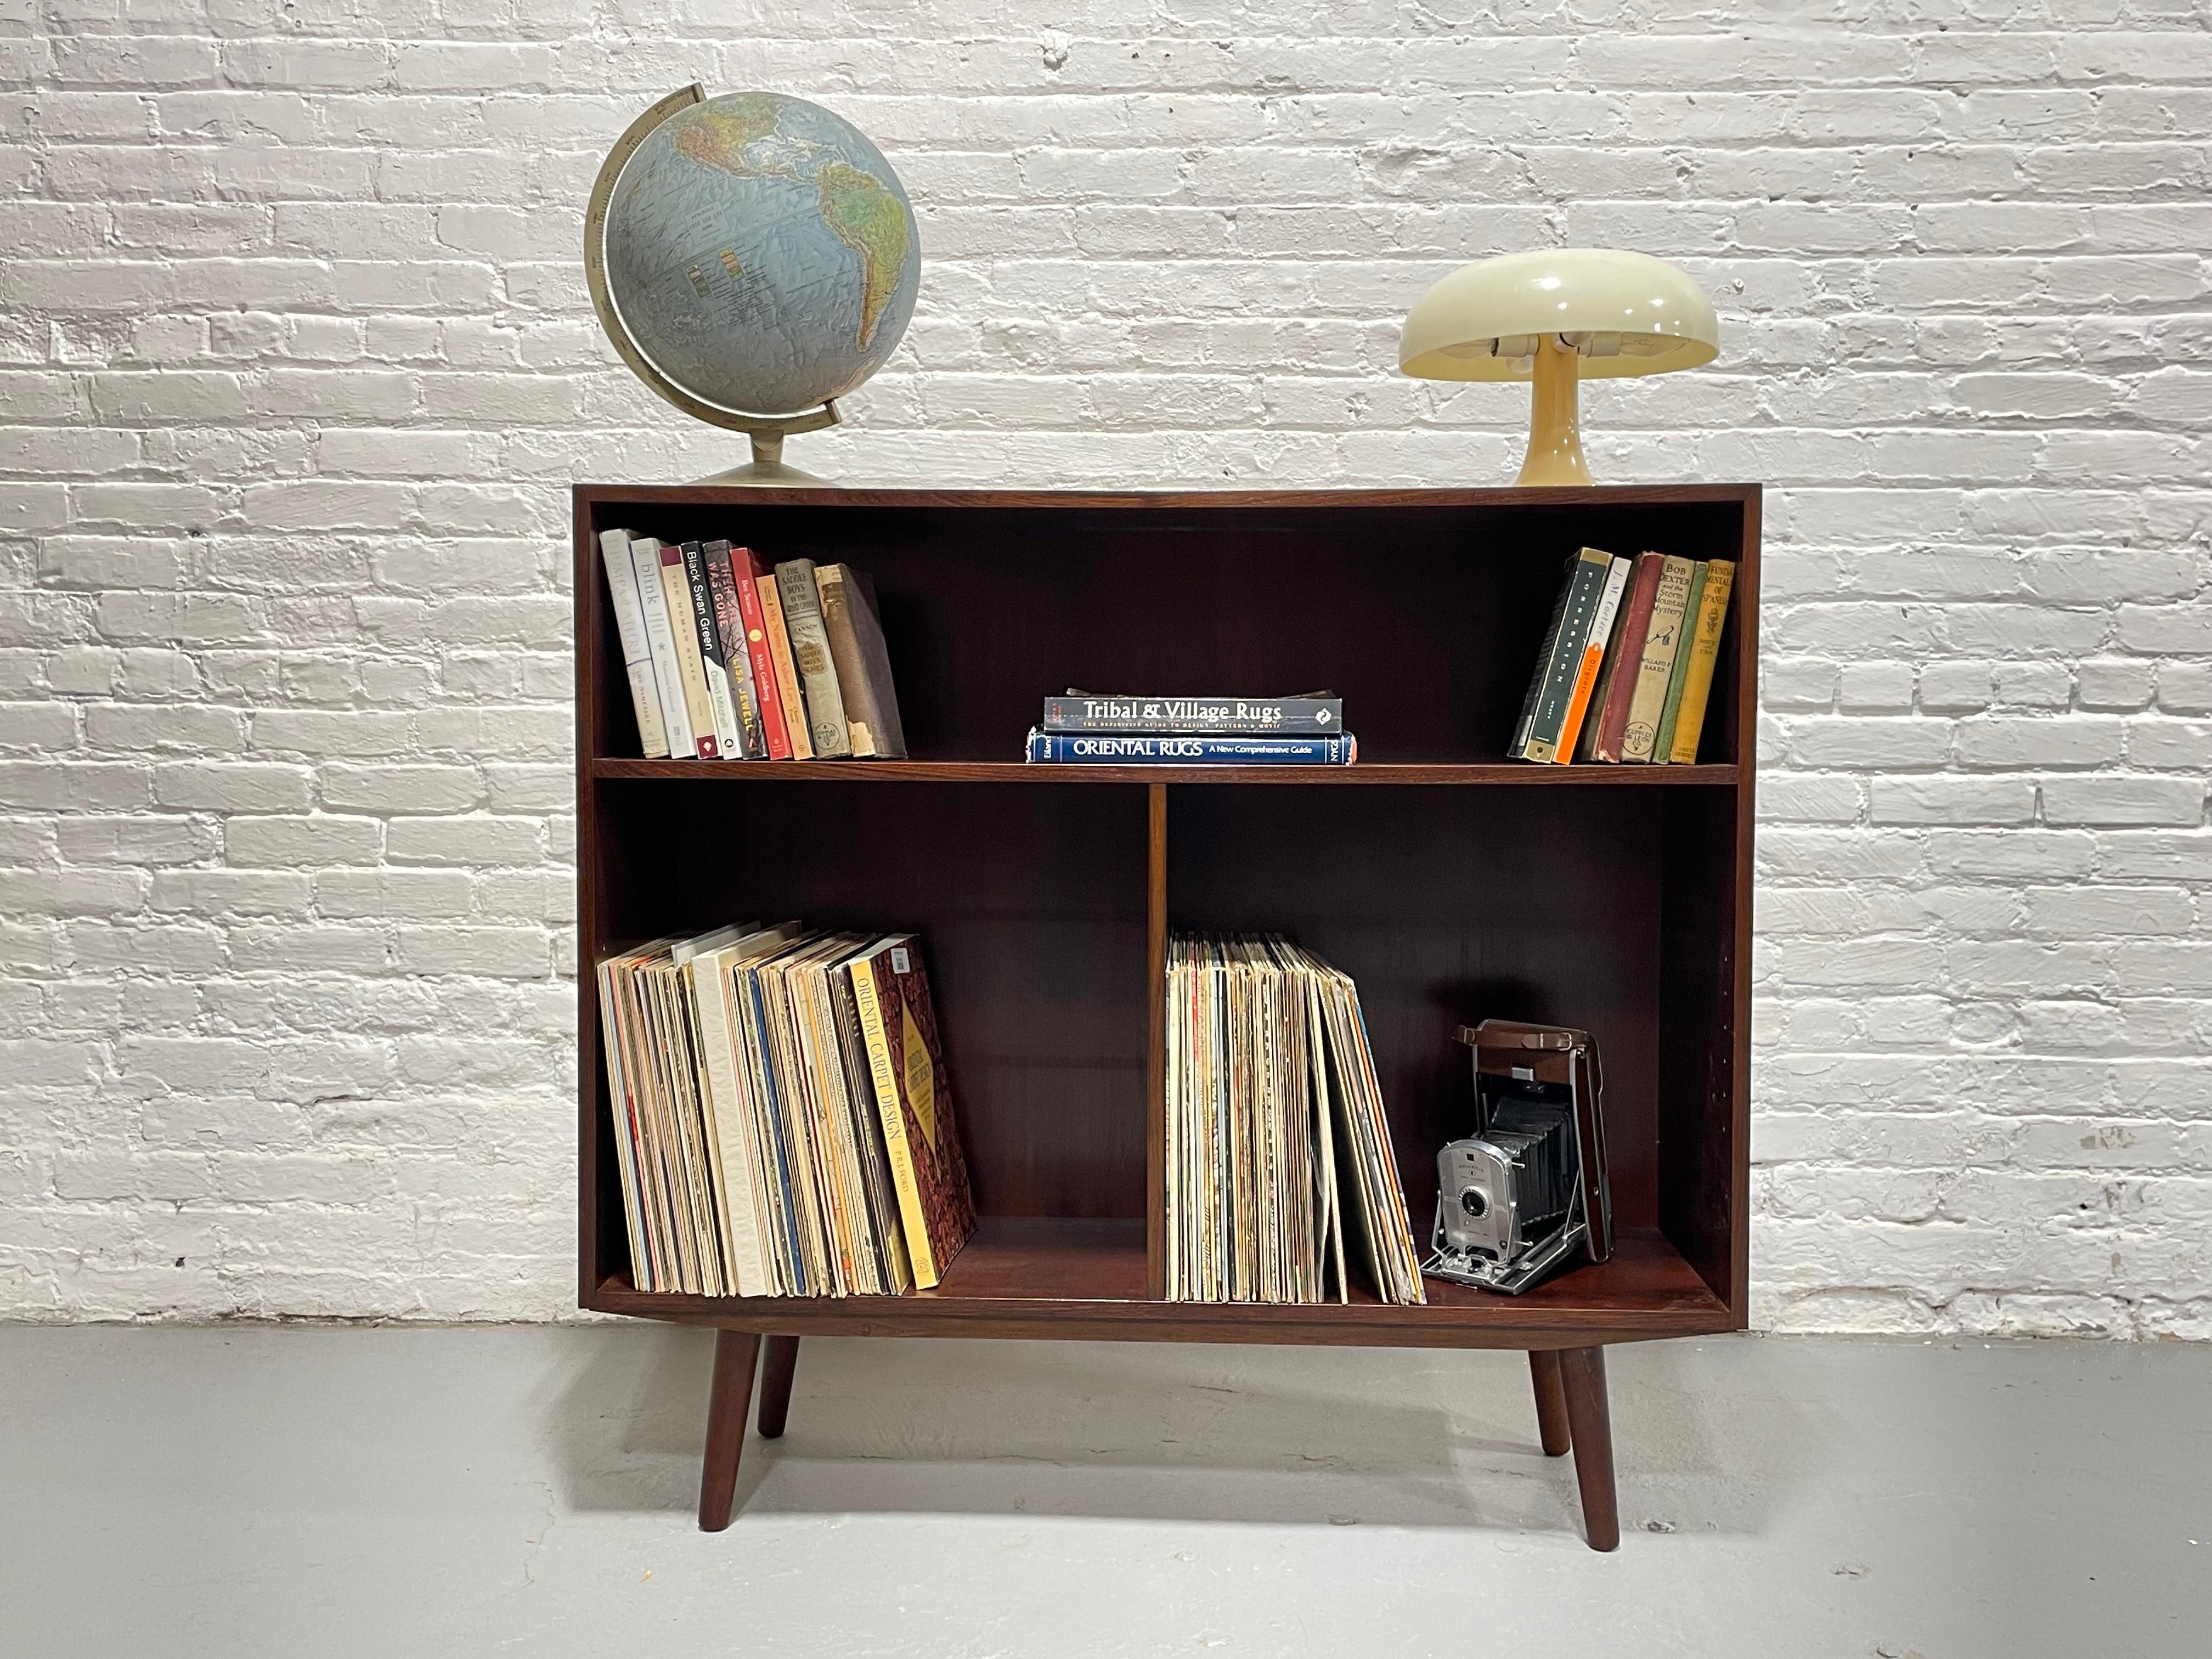 Danish Mid Century Modern Rosewood Bookcase / Vinyl Storage, c. 1960’s.  Loads of storage for all your books and collectables or vinyl collection across the two lower areas once the lower shelves are removed.   Constructed in rosewood and its deep,